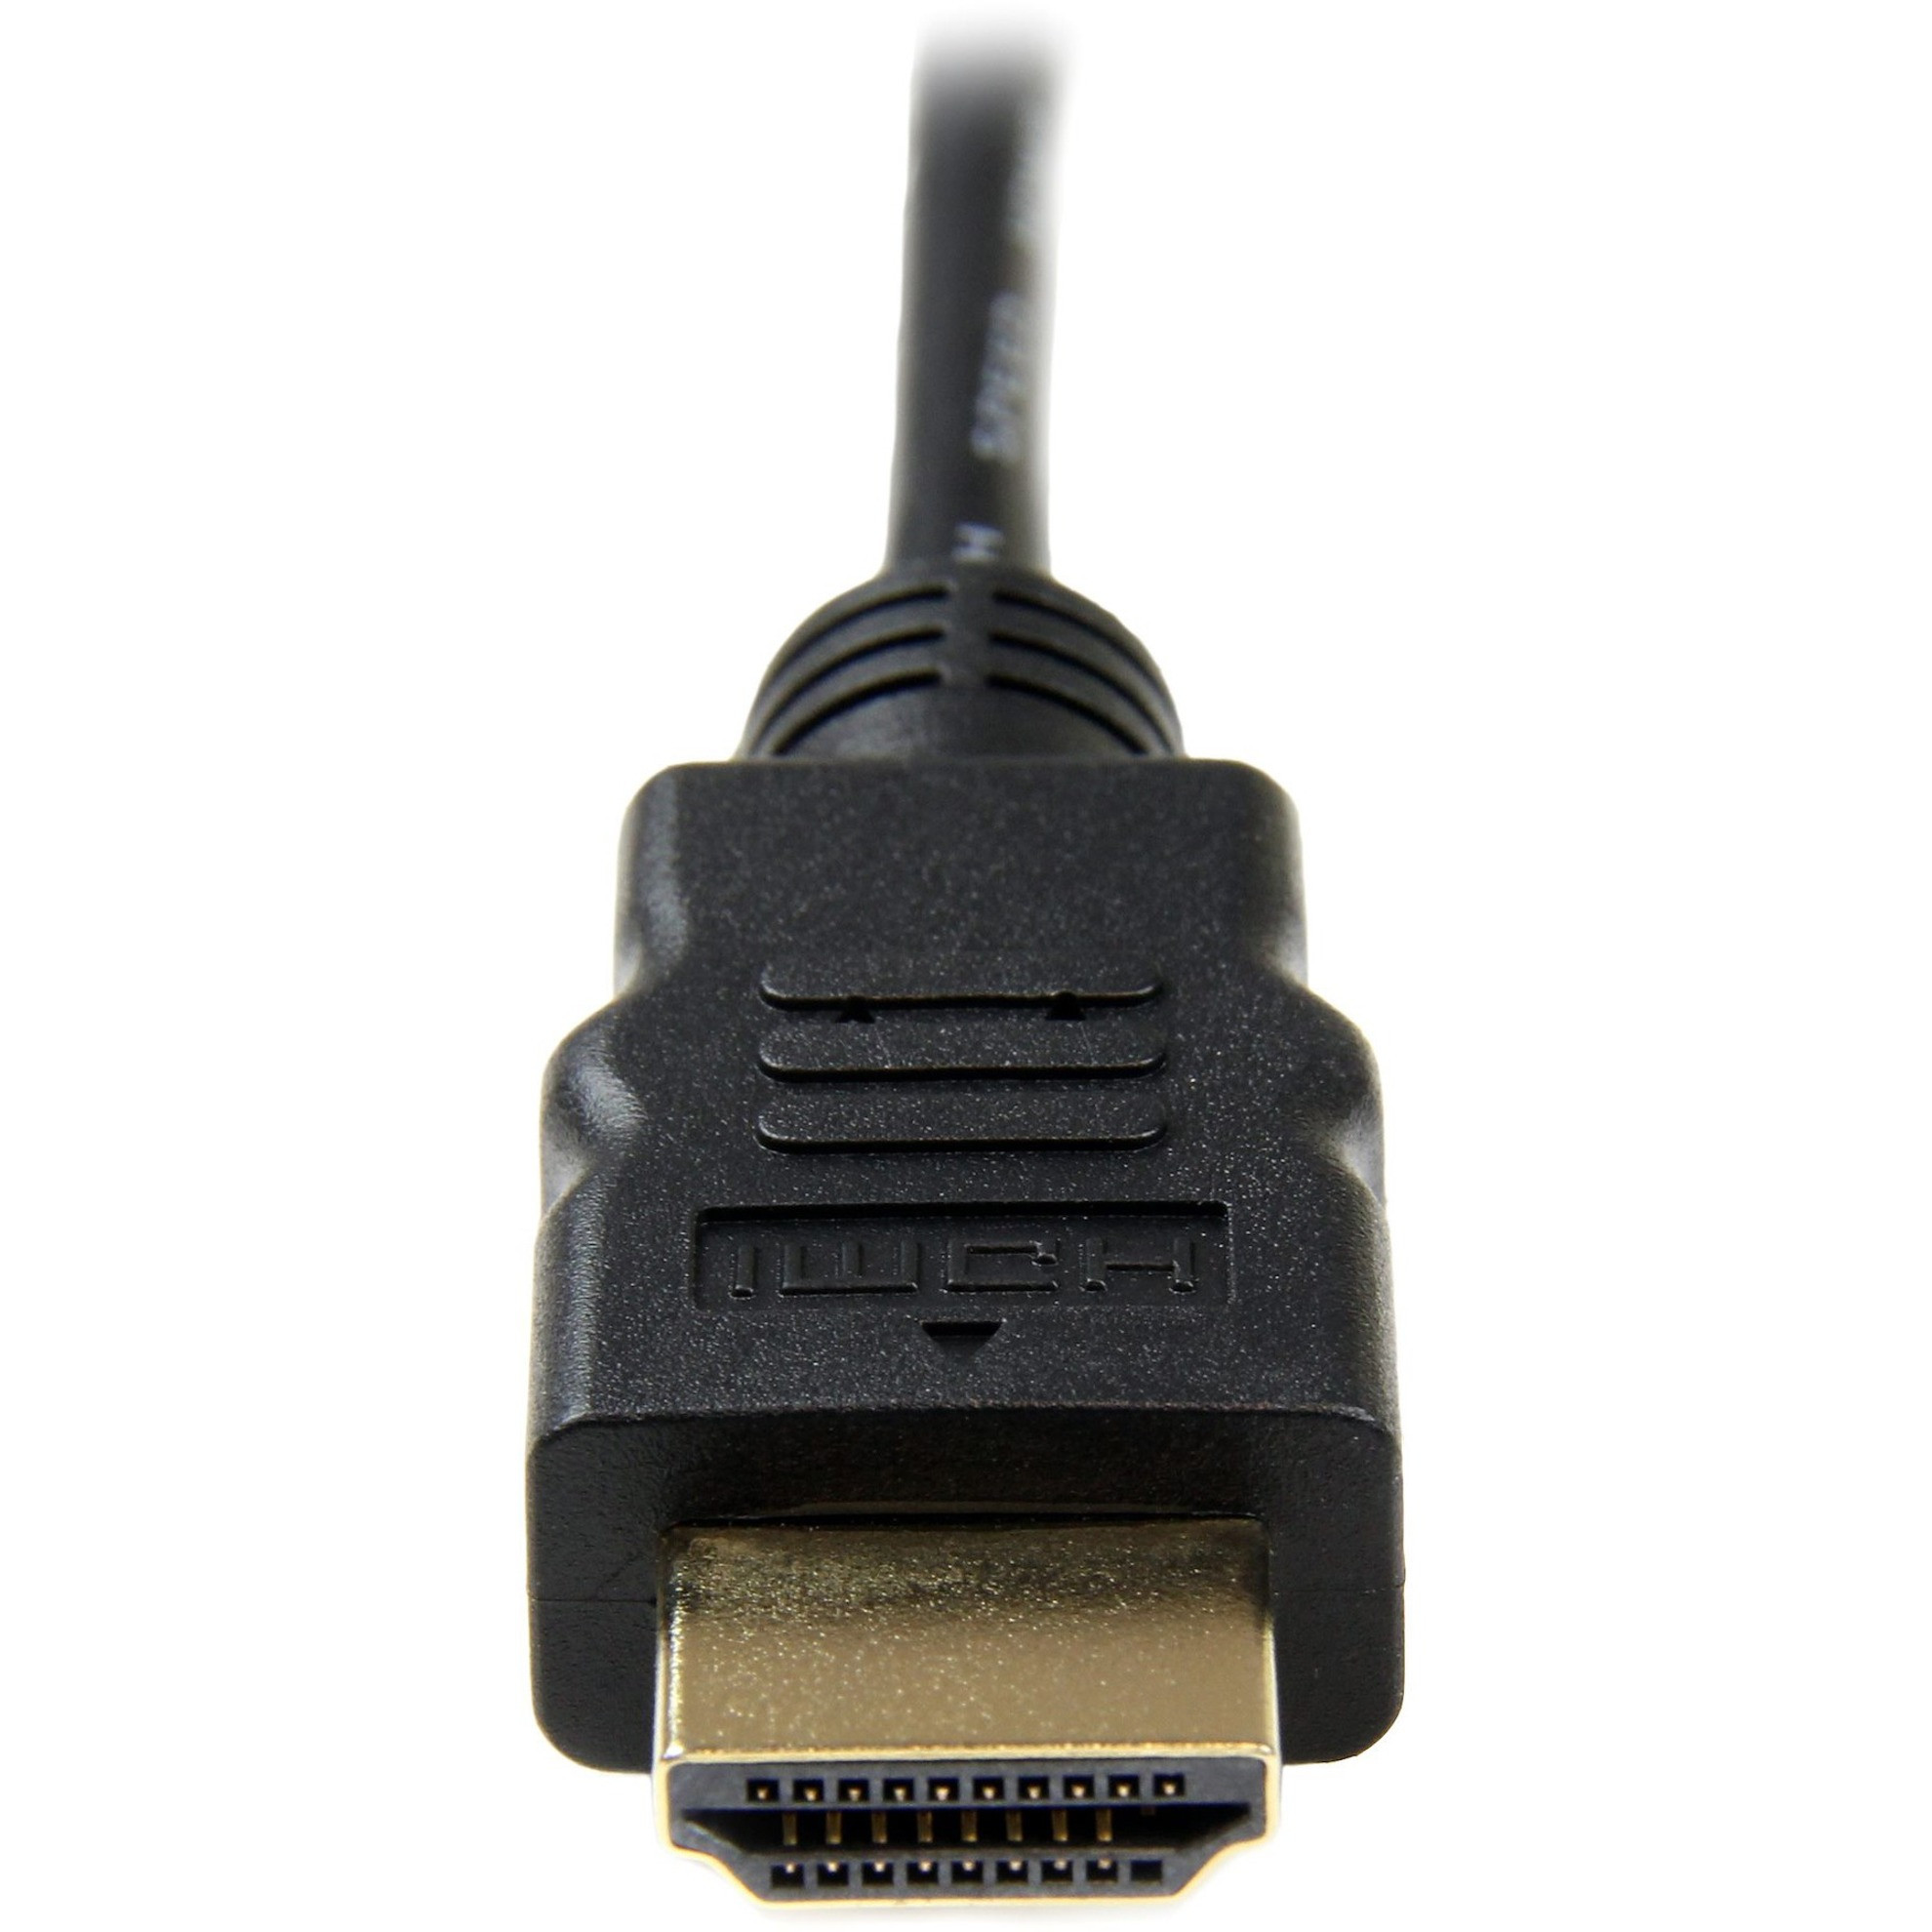 Micro Connectors High Speed 4K Micro HDMI to HDMI Cable w/Ethernet